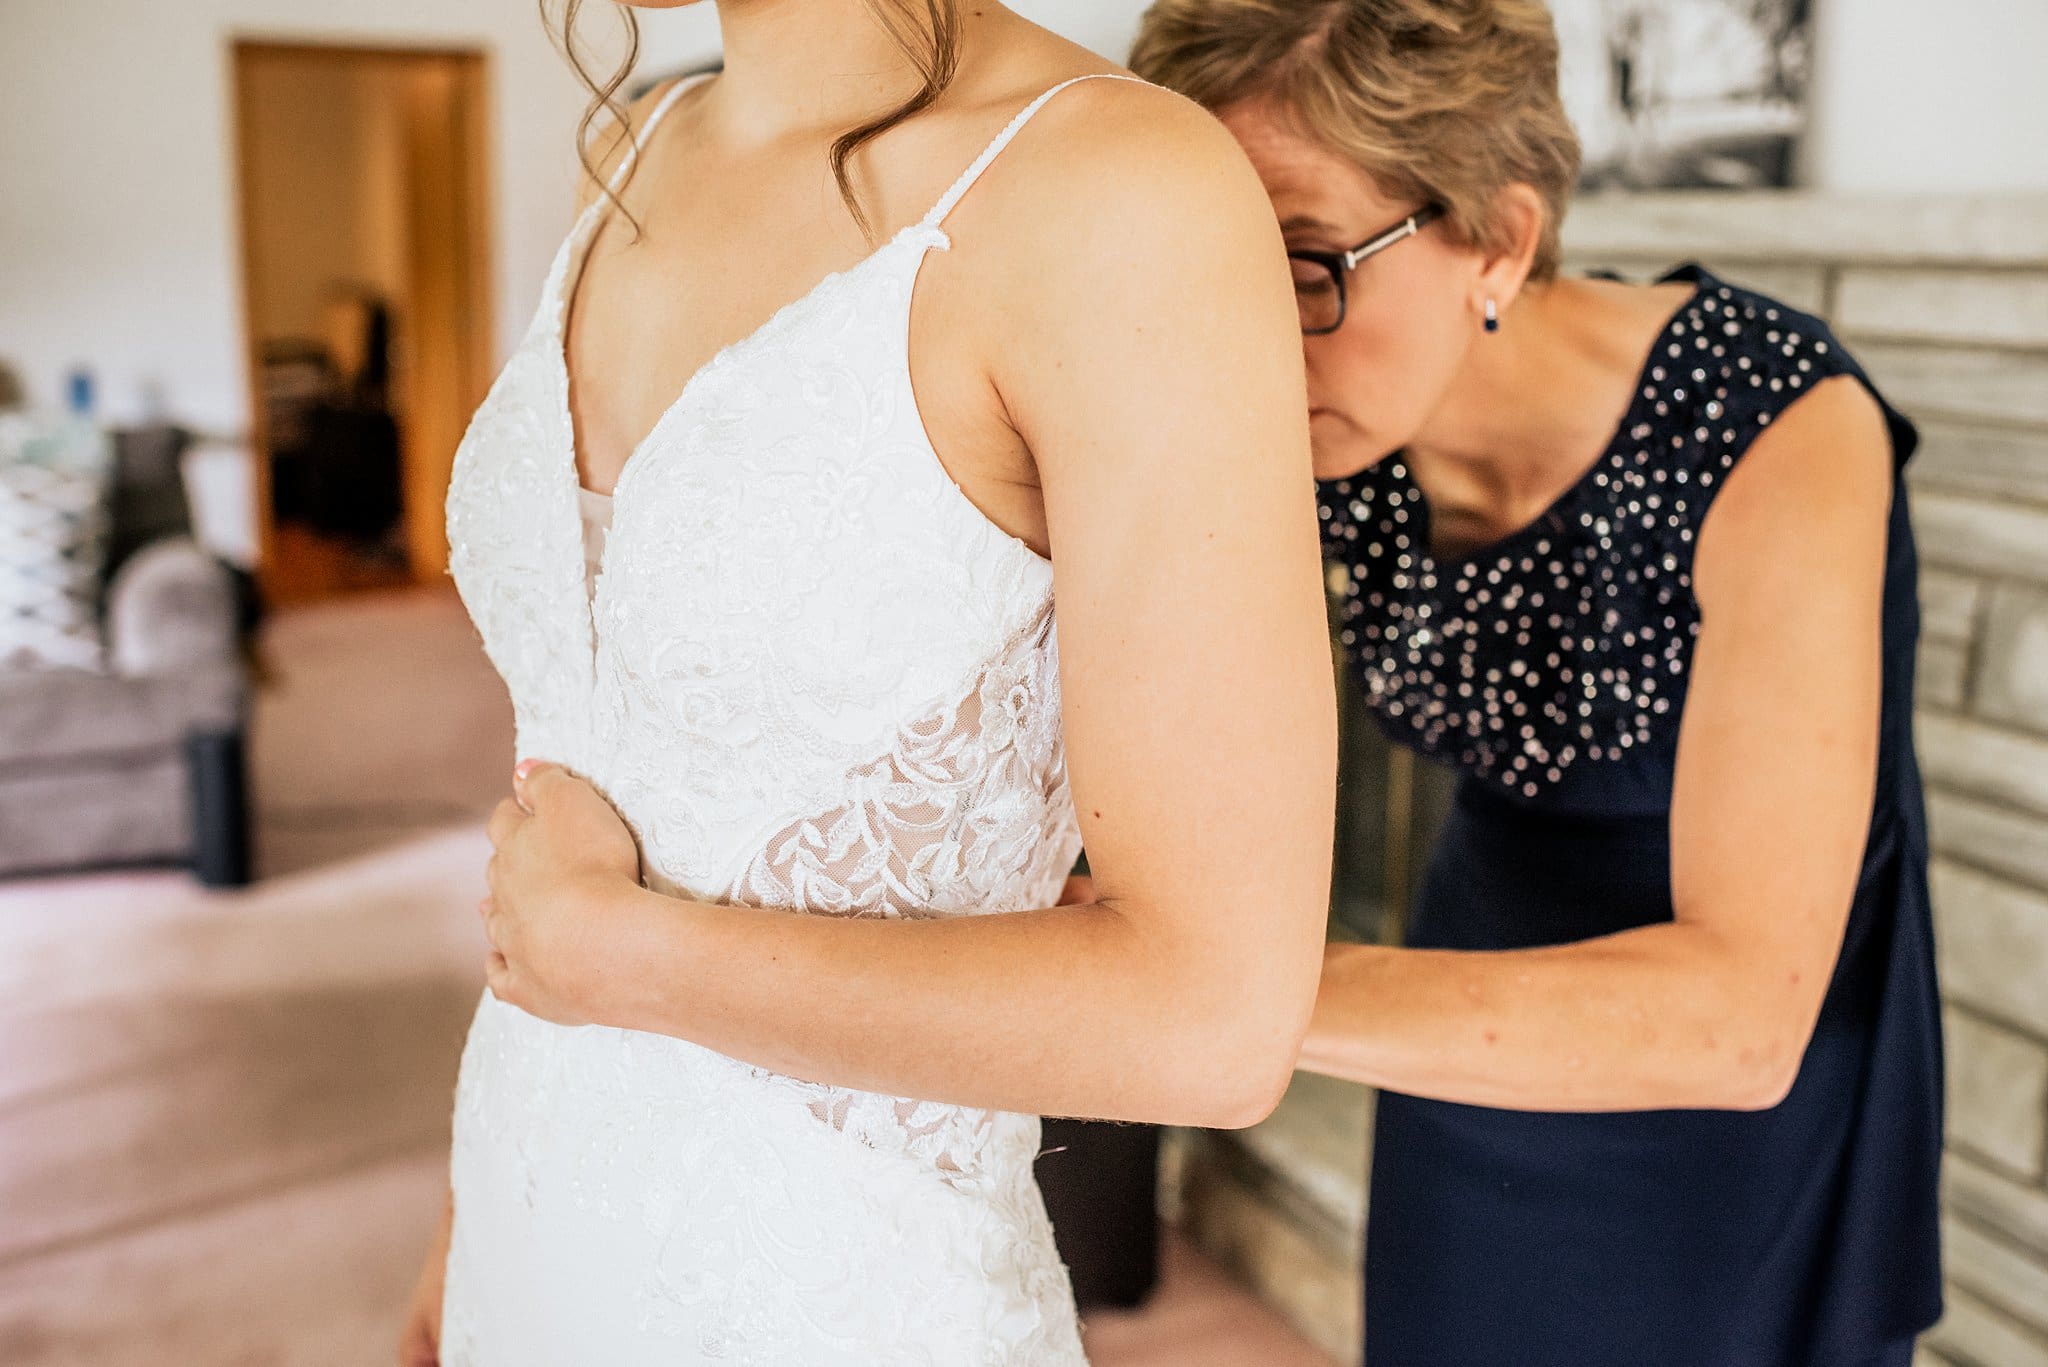 mother of the bride helping daughter get ready for wedding